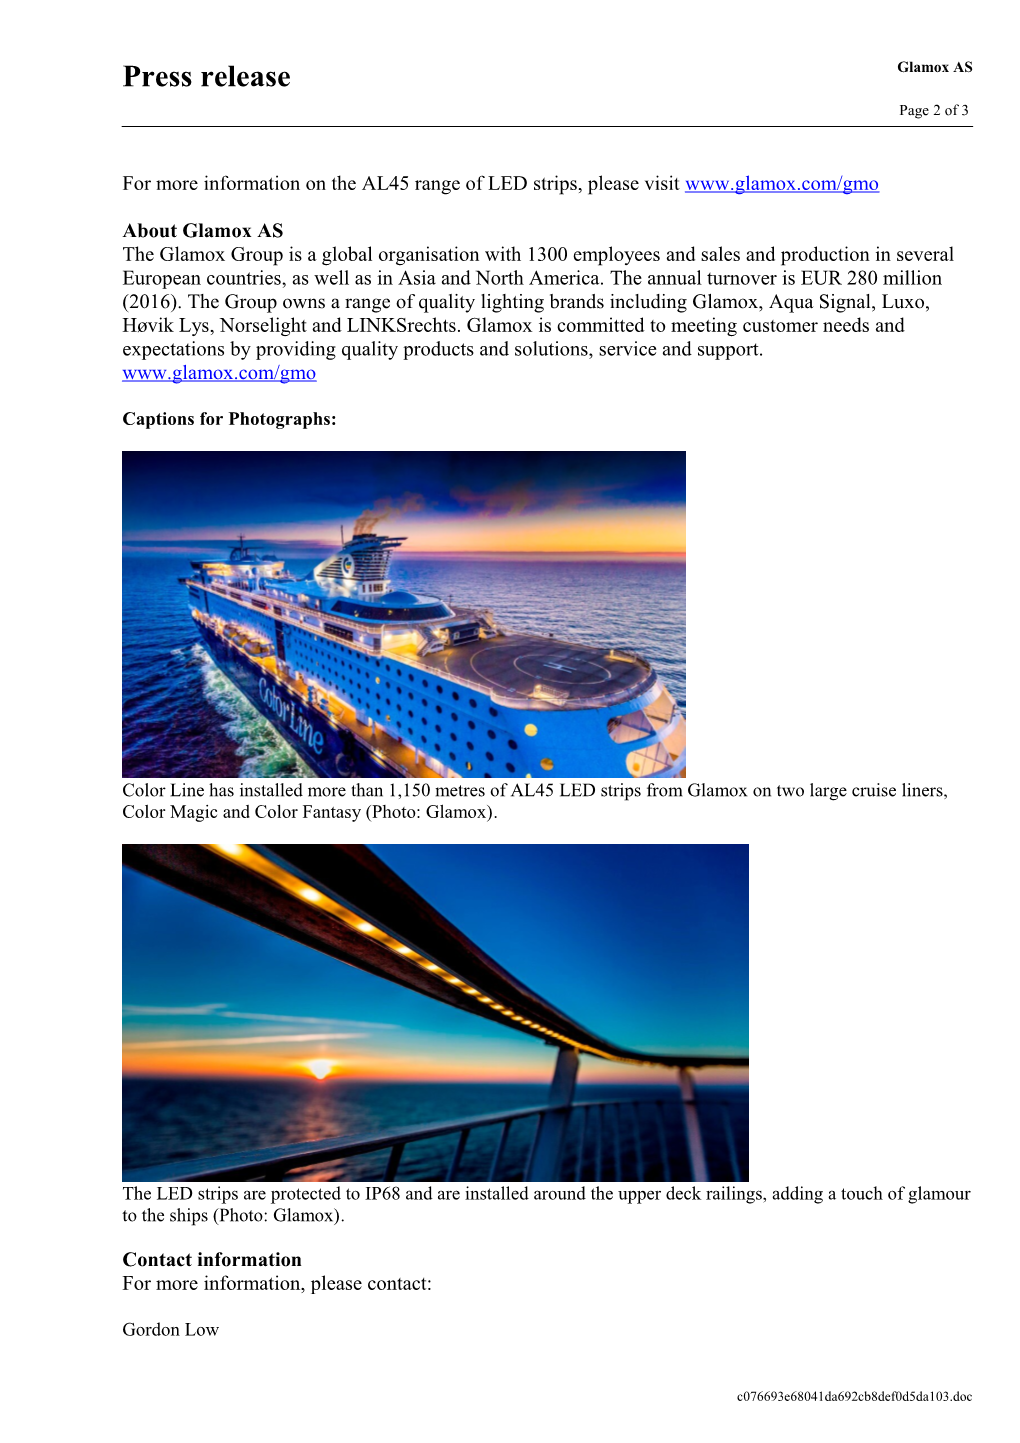 Glamox LED Strips Add a Touch of Glamour to Two Color Line Cruise Ships